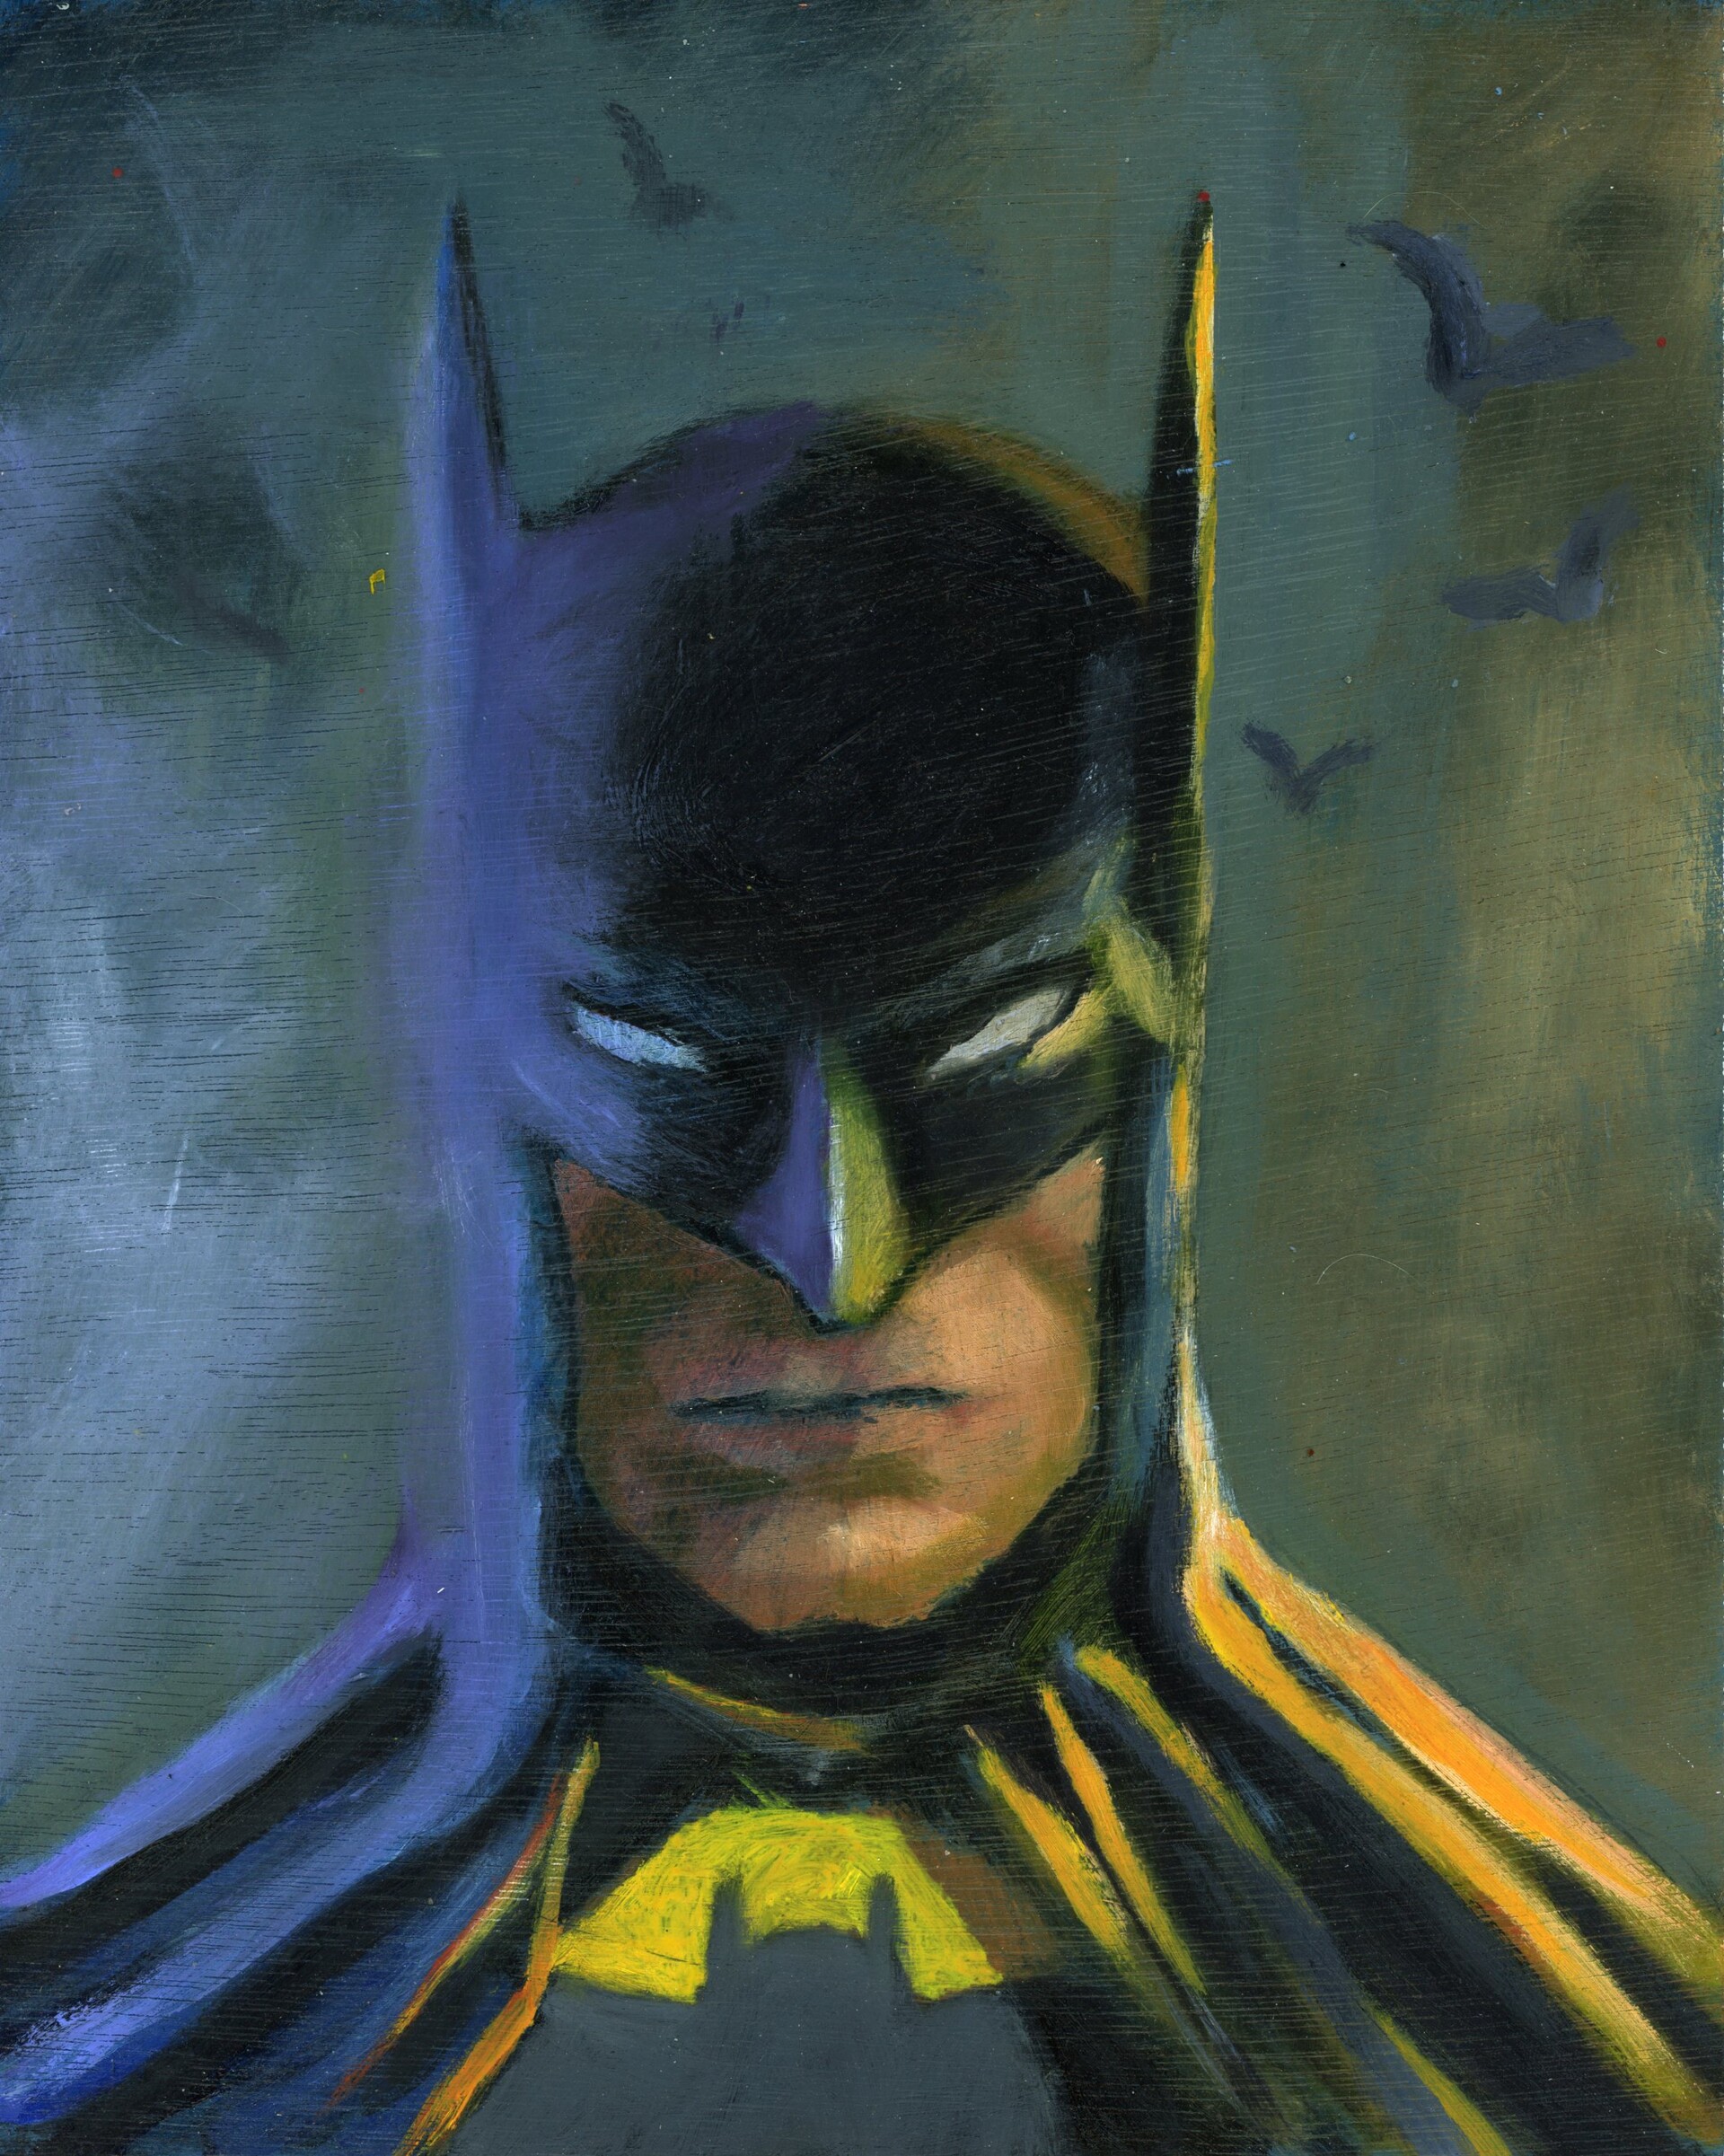 Superiority Strength overlook ArtStation - Young Batman Commission 8x12 oil paint